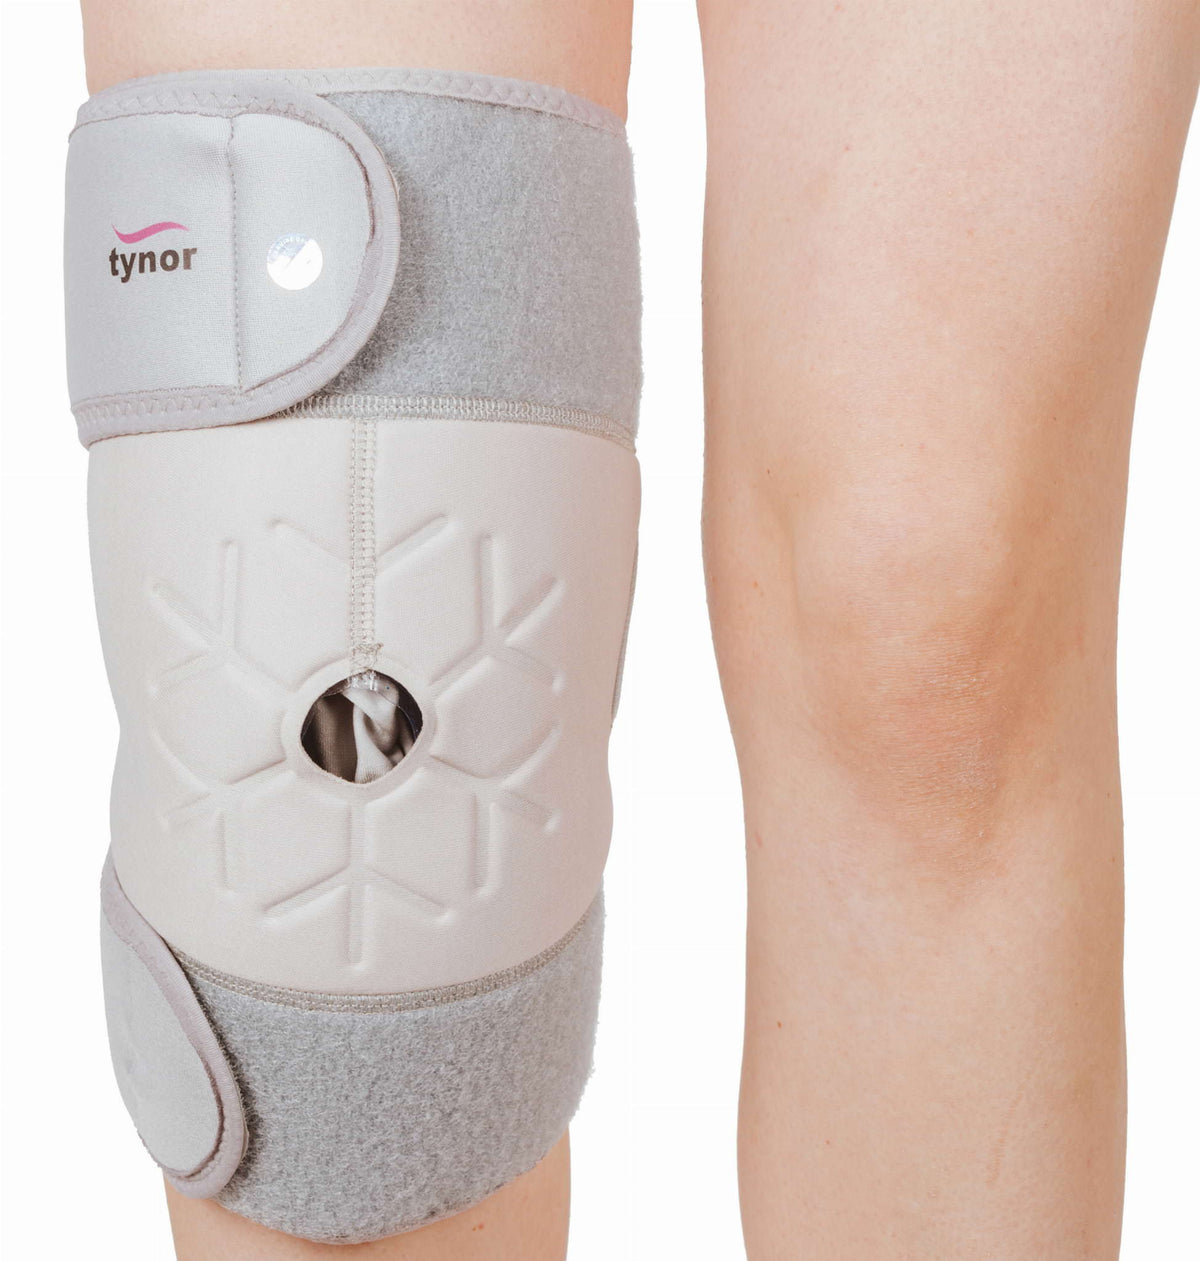 i02-knee-wrap-with-cool-pack-2